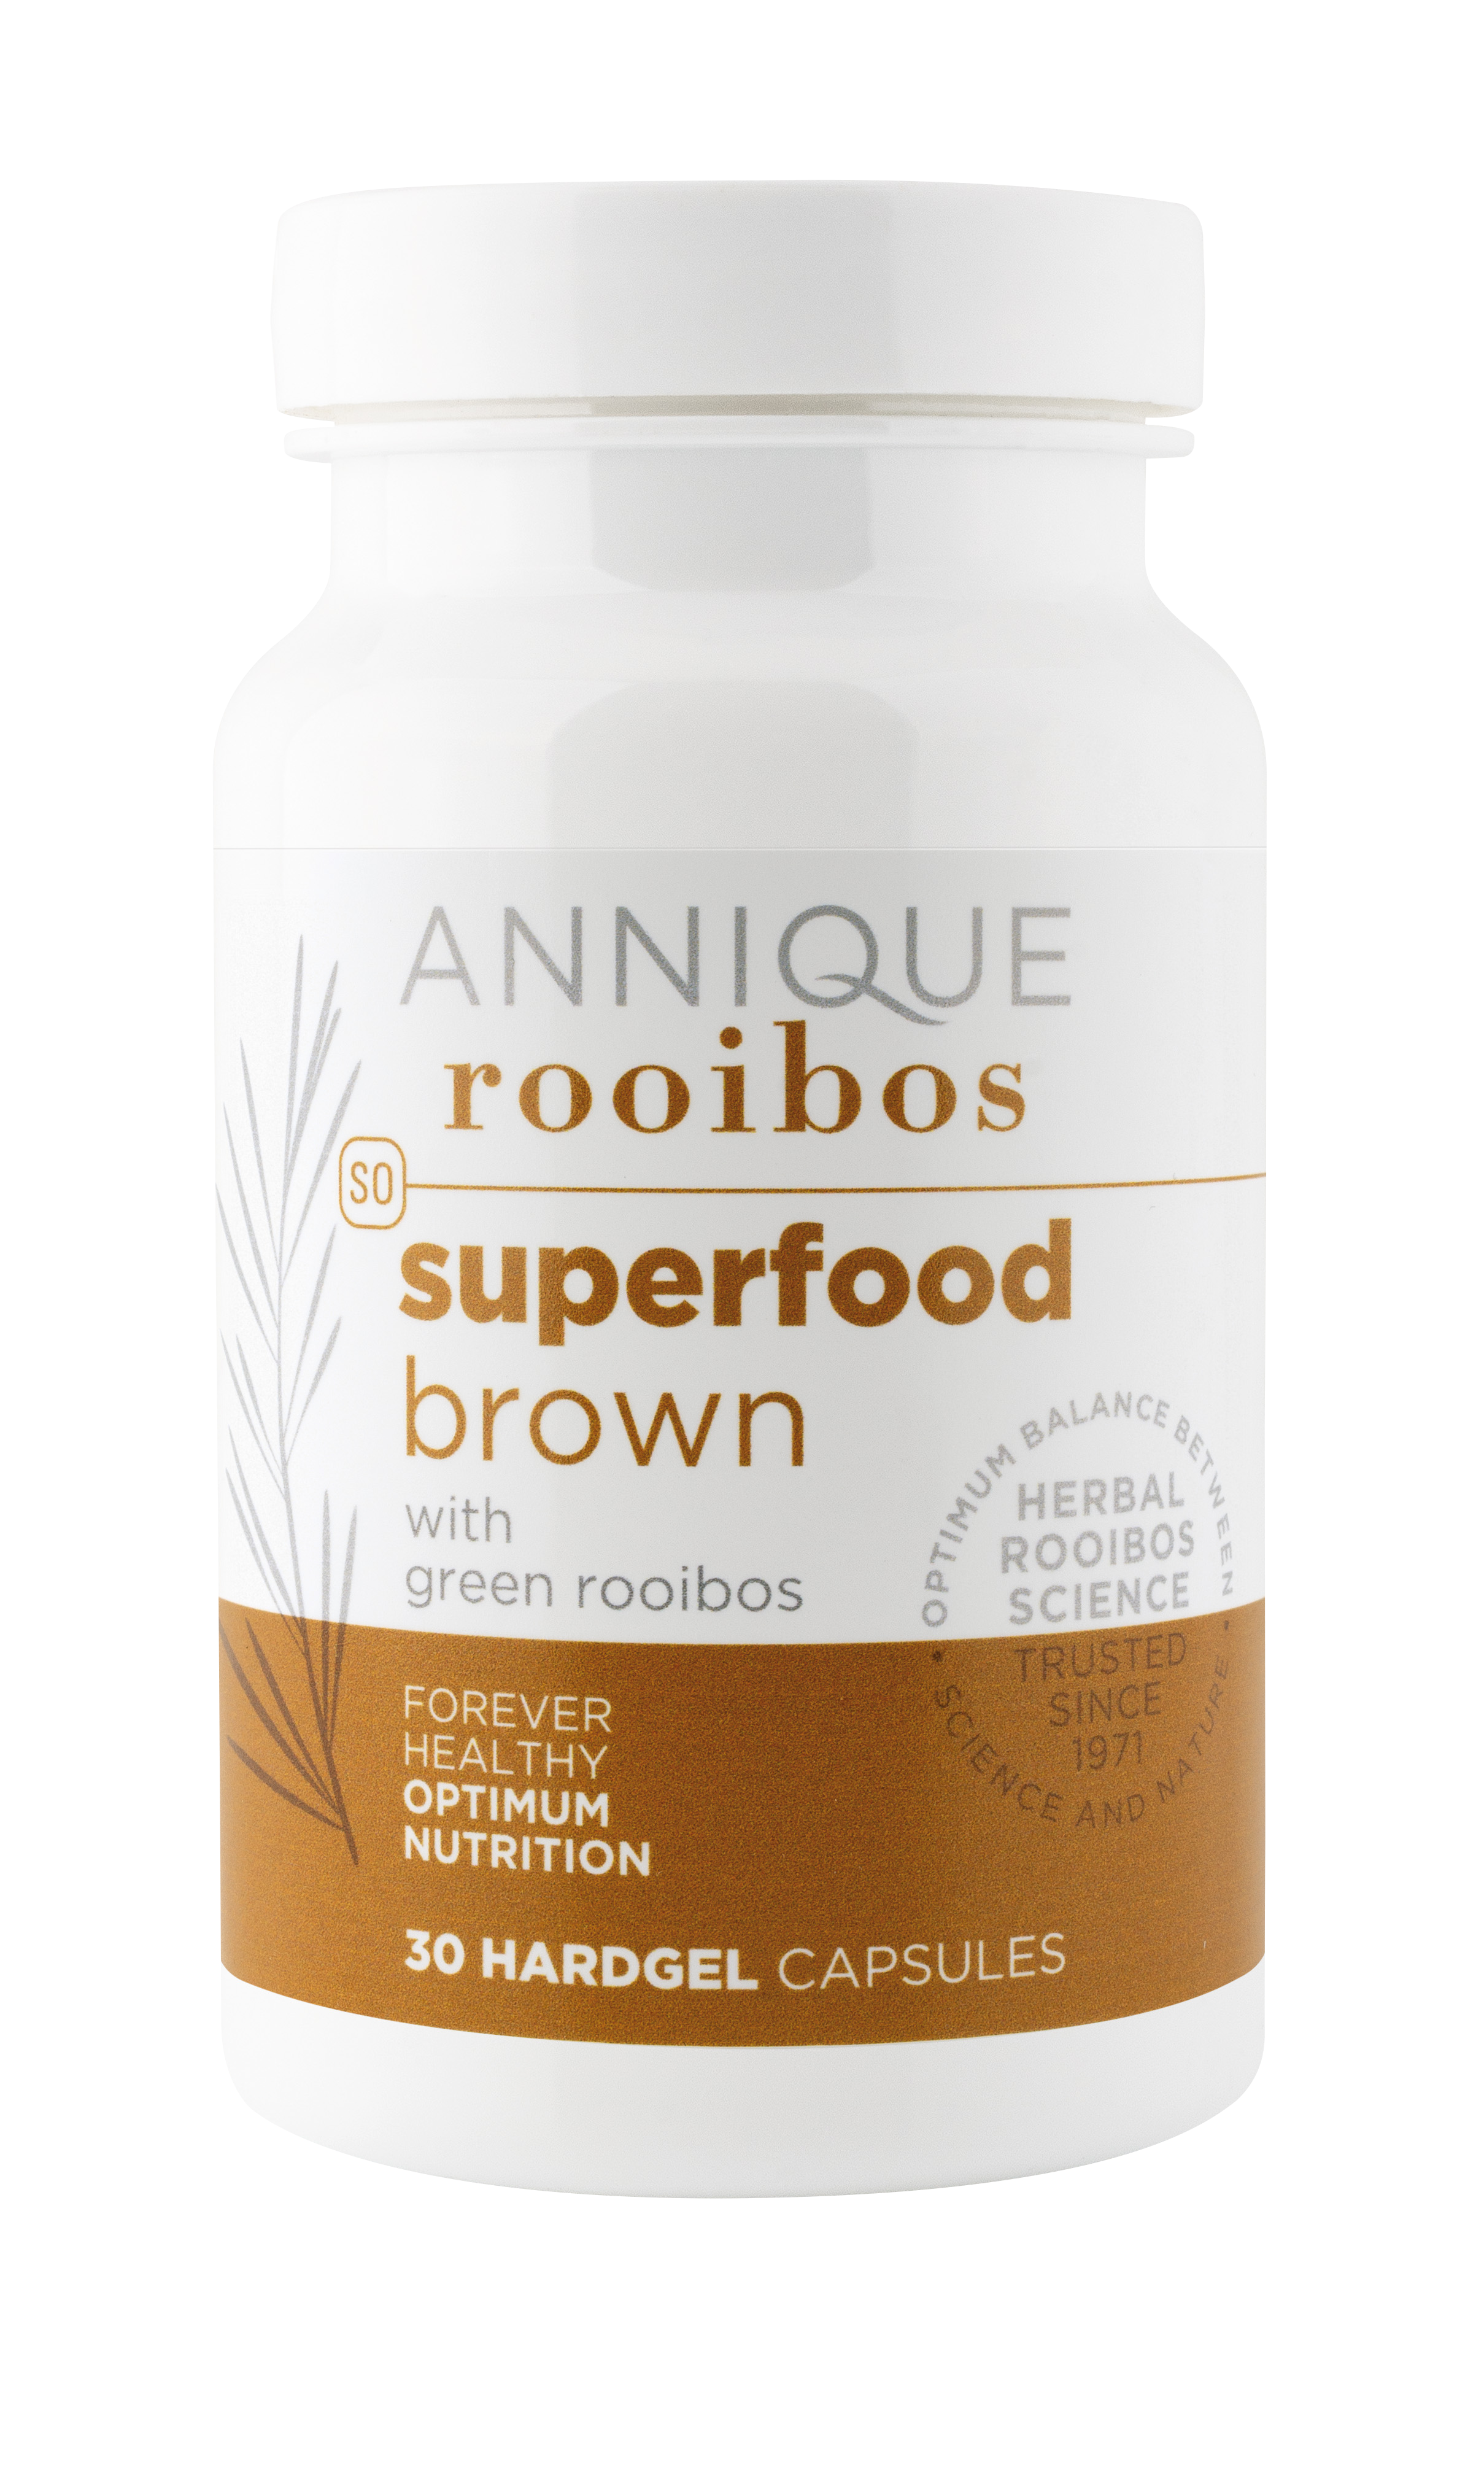 Superfood Brown with Green Rooibos – 30 Hardgel Capsules 